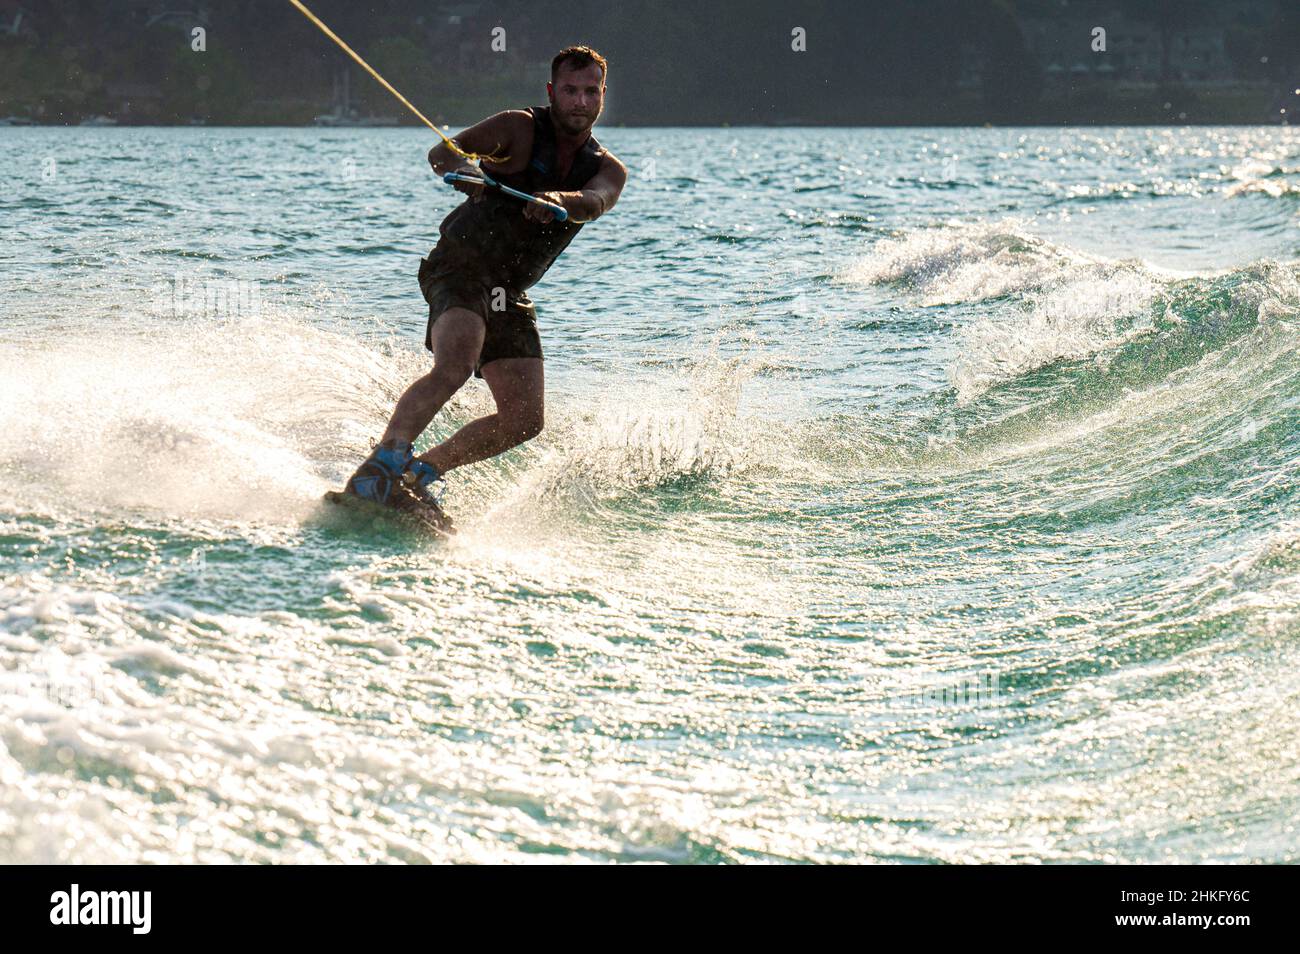 France, Haute-Savoie (74), Annecy, Lake Annecy, wakeboarder Stock Photo